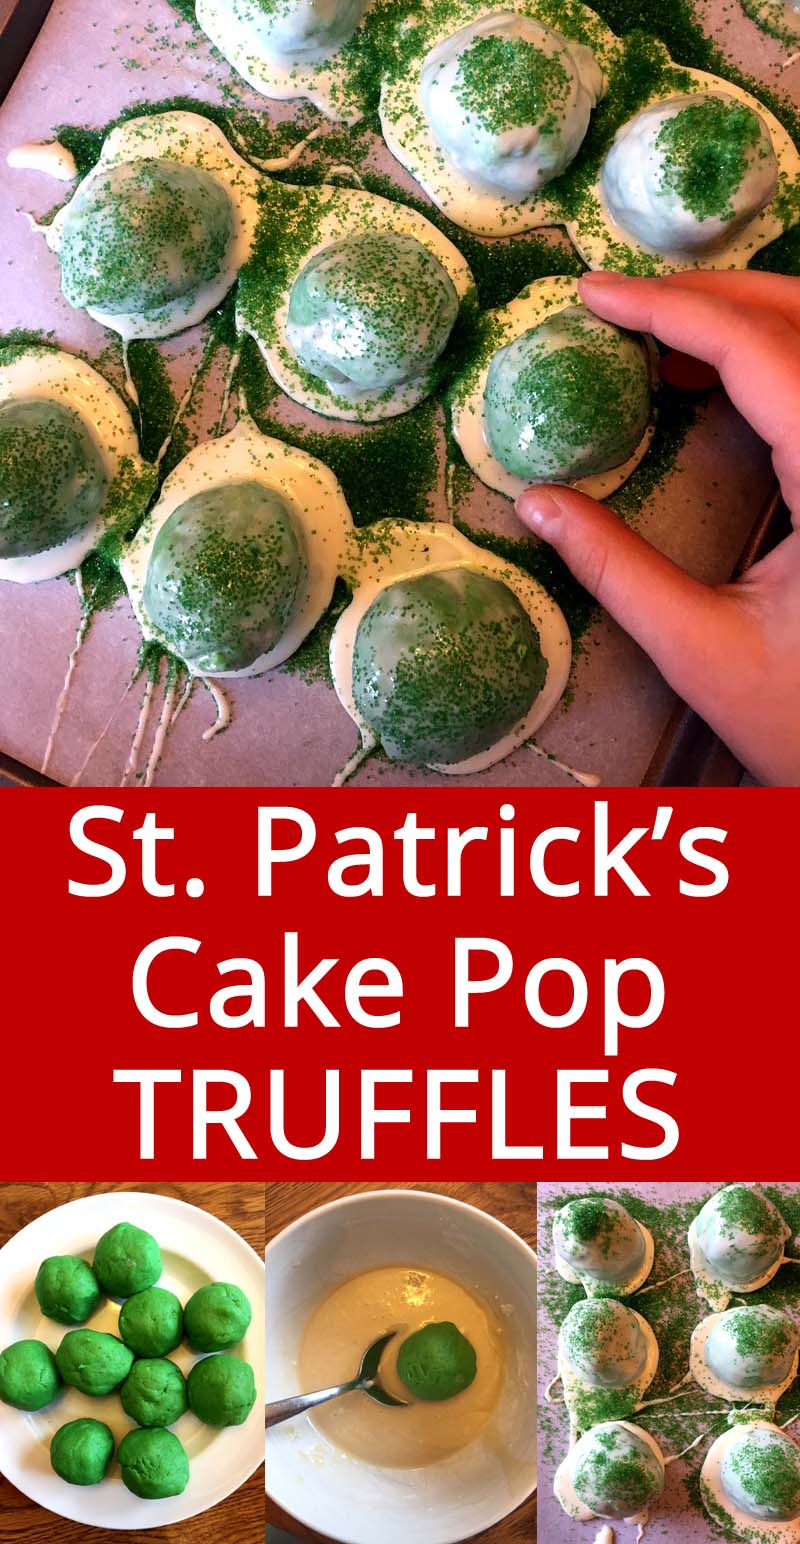 These green cake pop truffles are perfect for St. Patricks Day! So easy to make and everyone loves them!